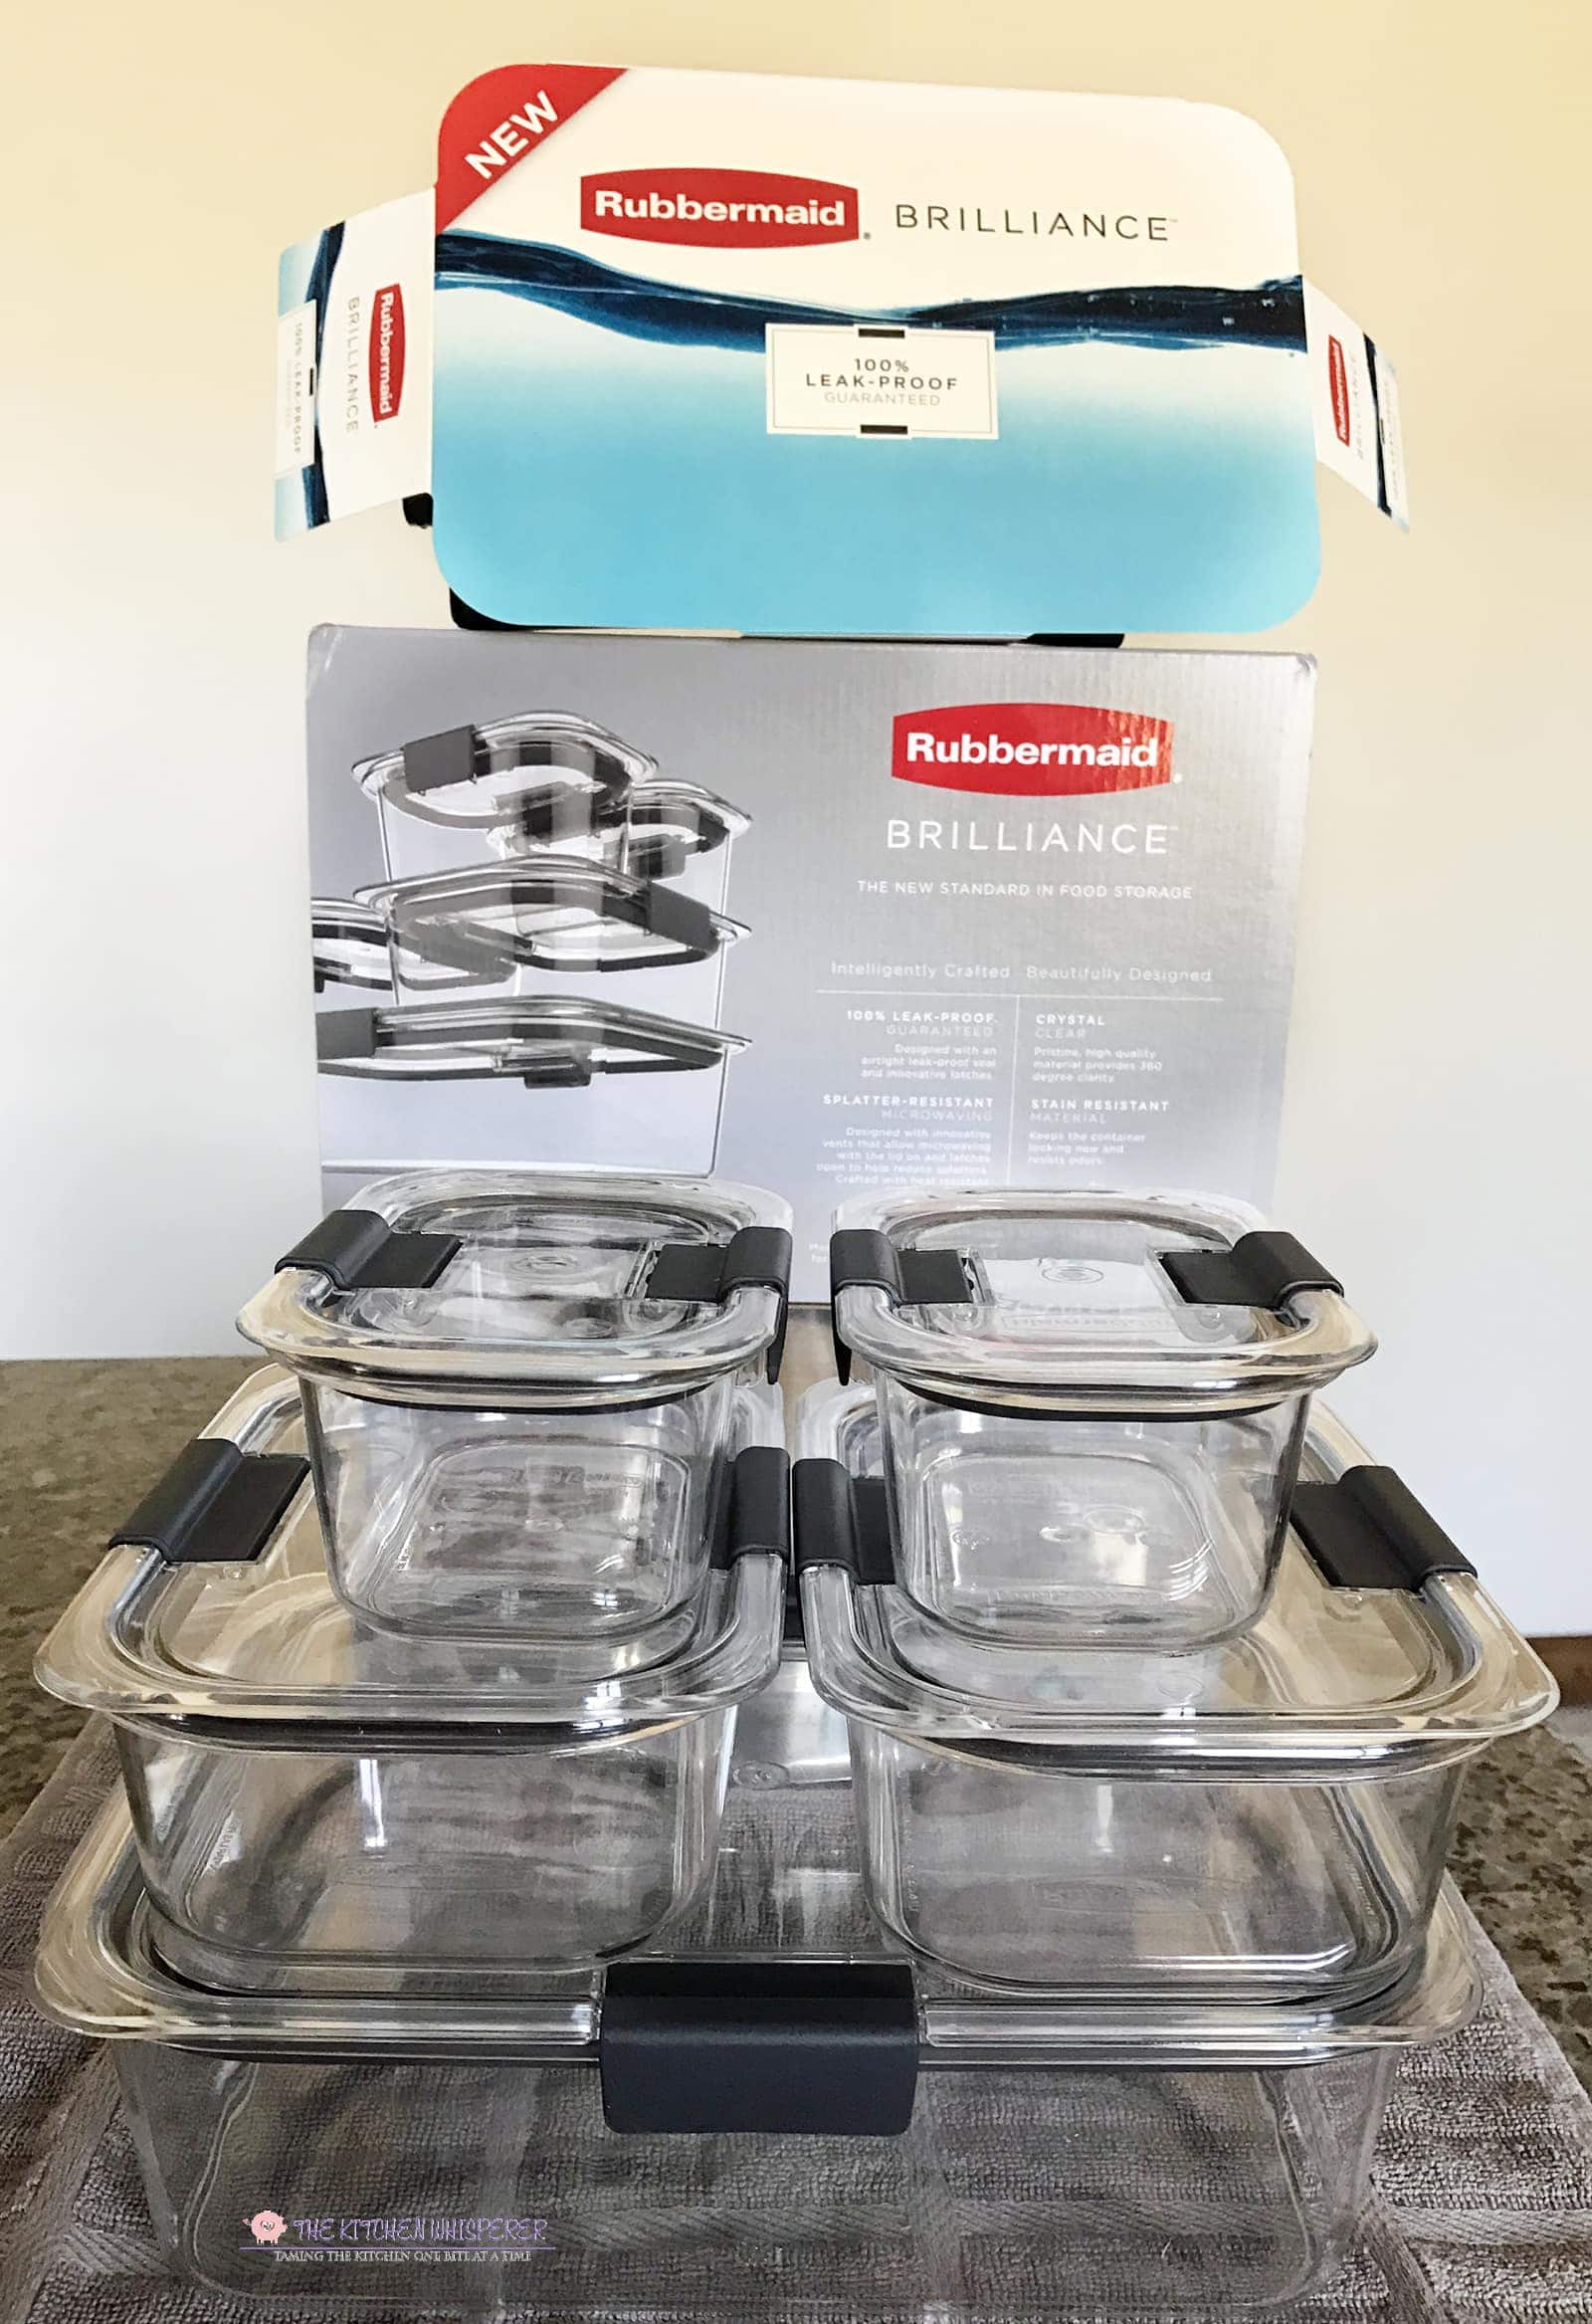 Meal Prep Made Easy with Rubbermaid BRILLIANCE - Southern Made Simple